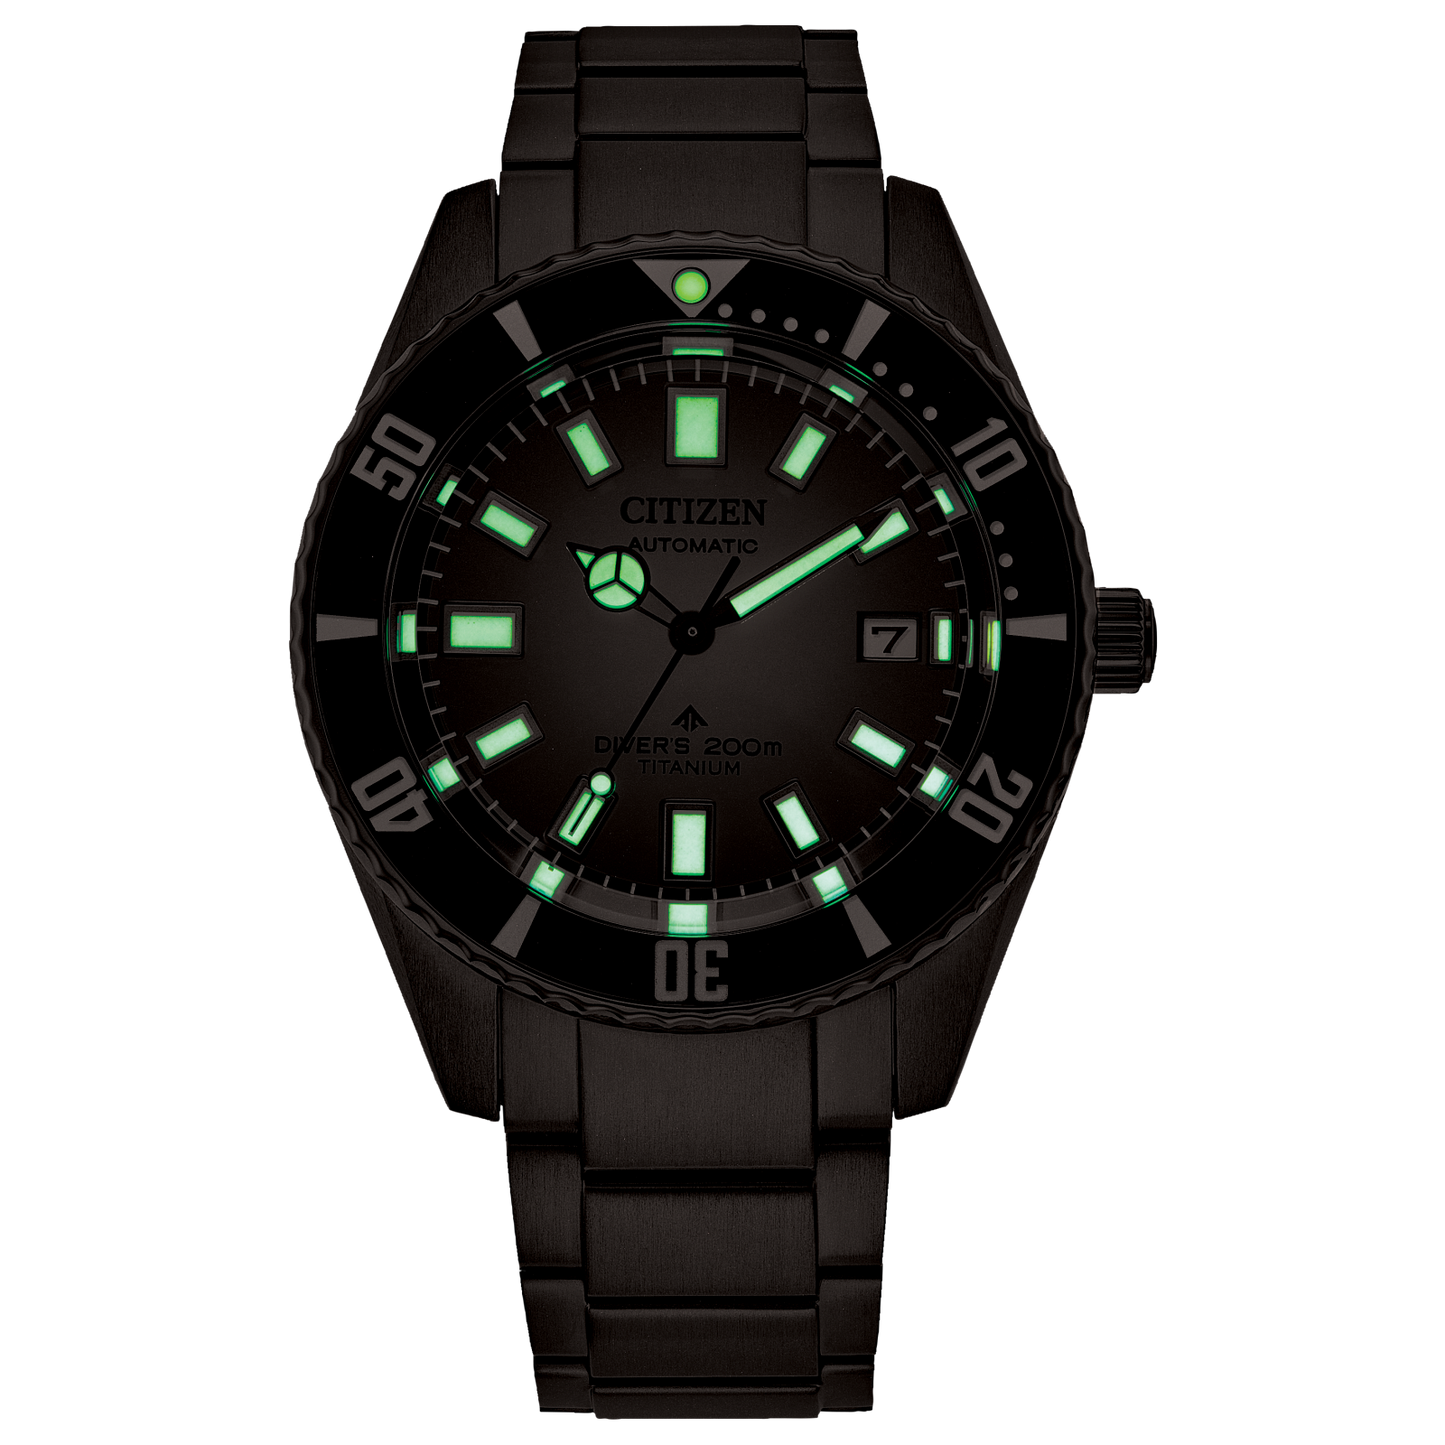 Promaster Dive Automatic Watch NB6025-59H